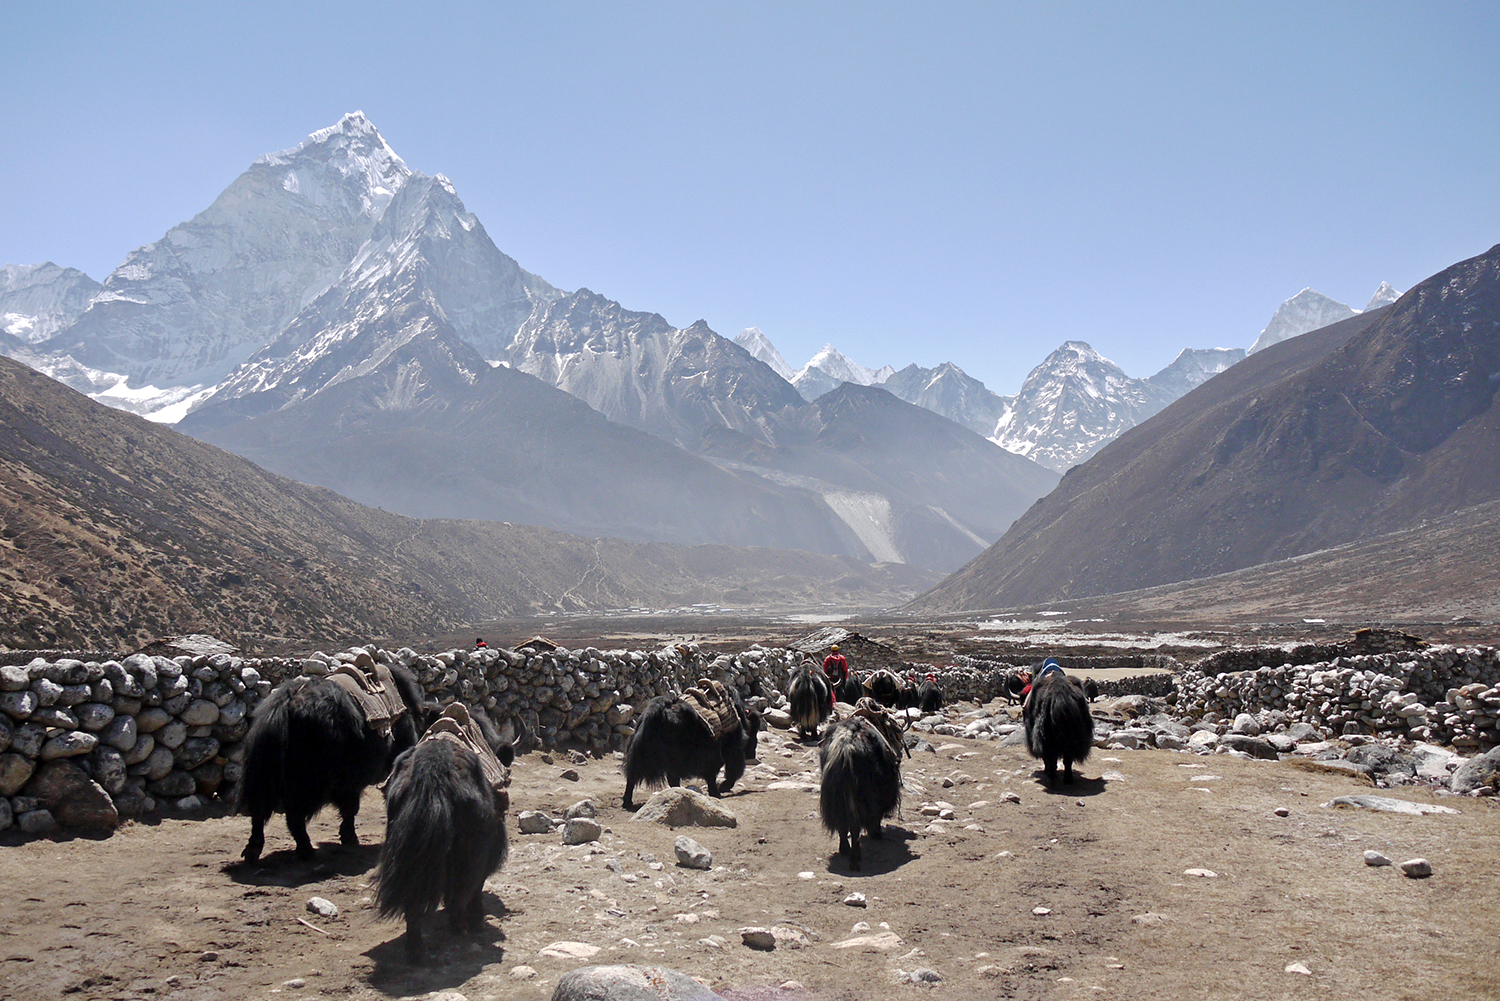 Everest Base Camp Trek unguided | Yaks being herded back down the mountain after carrying supplies to base camp